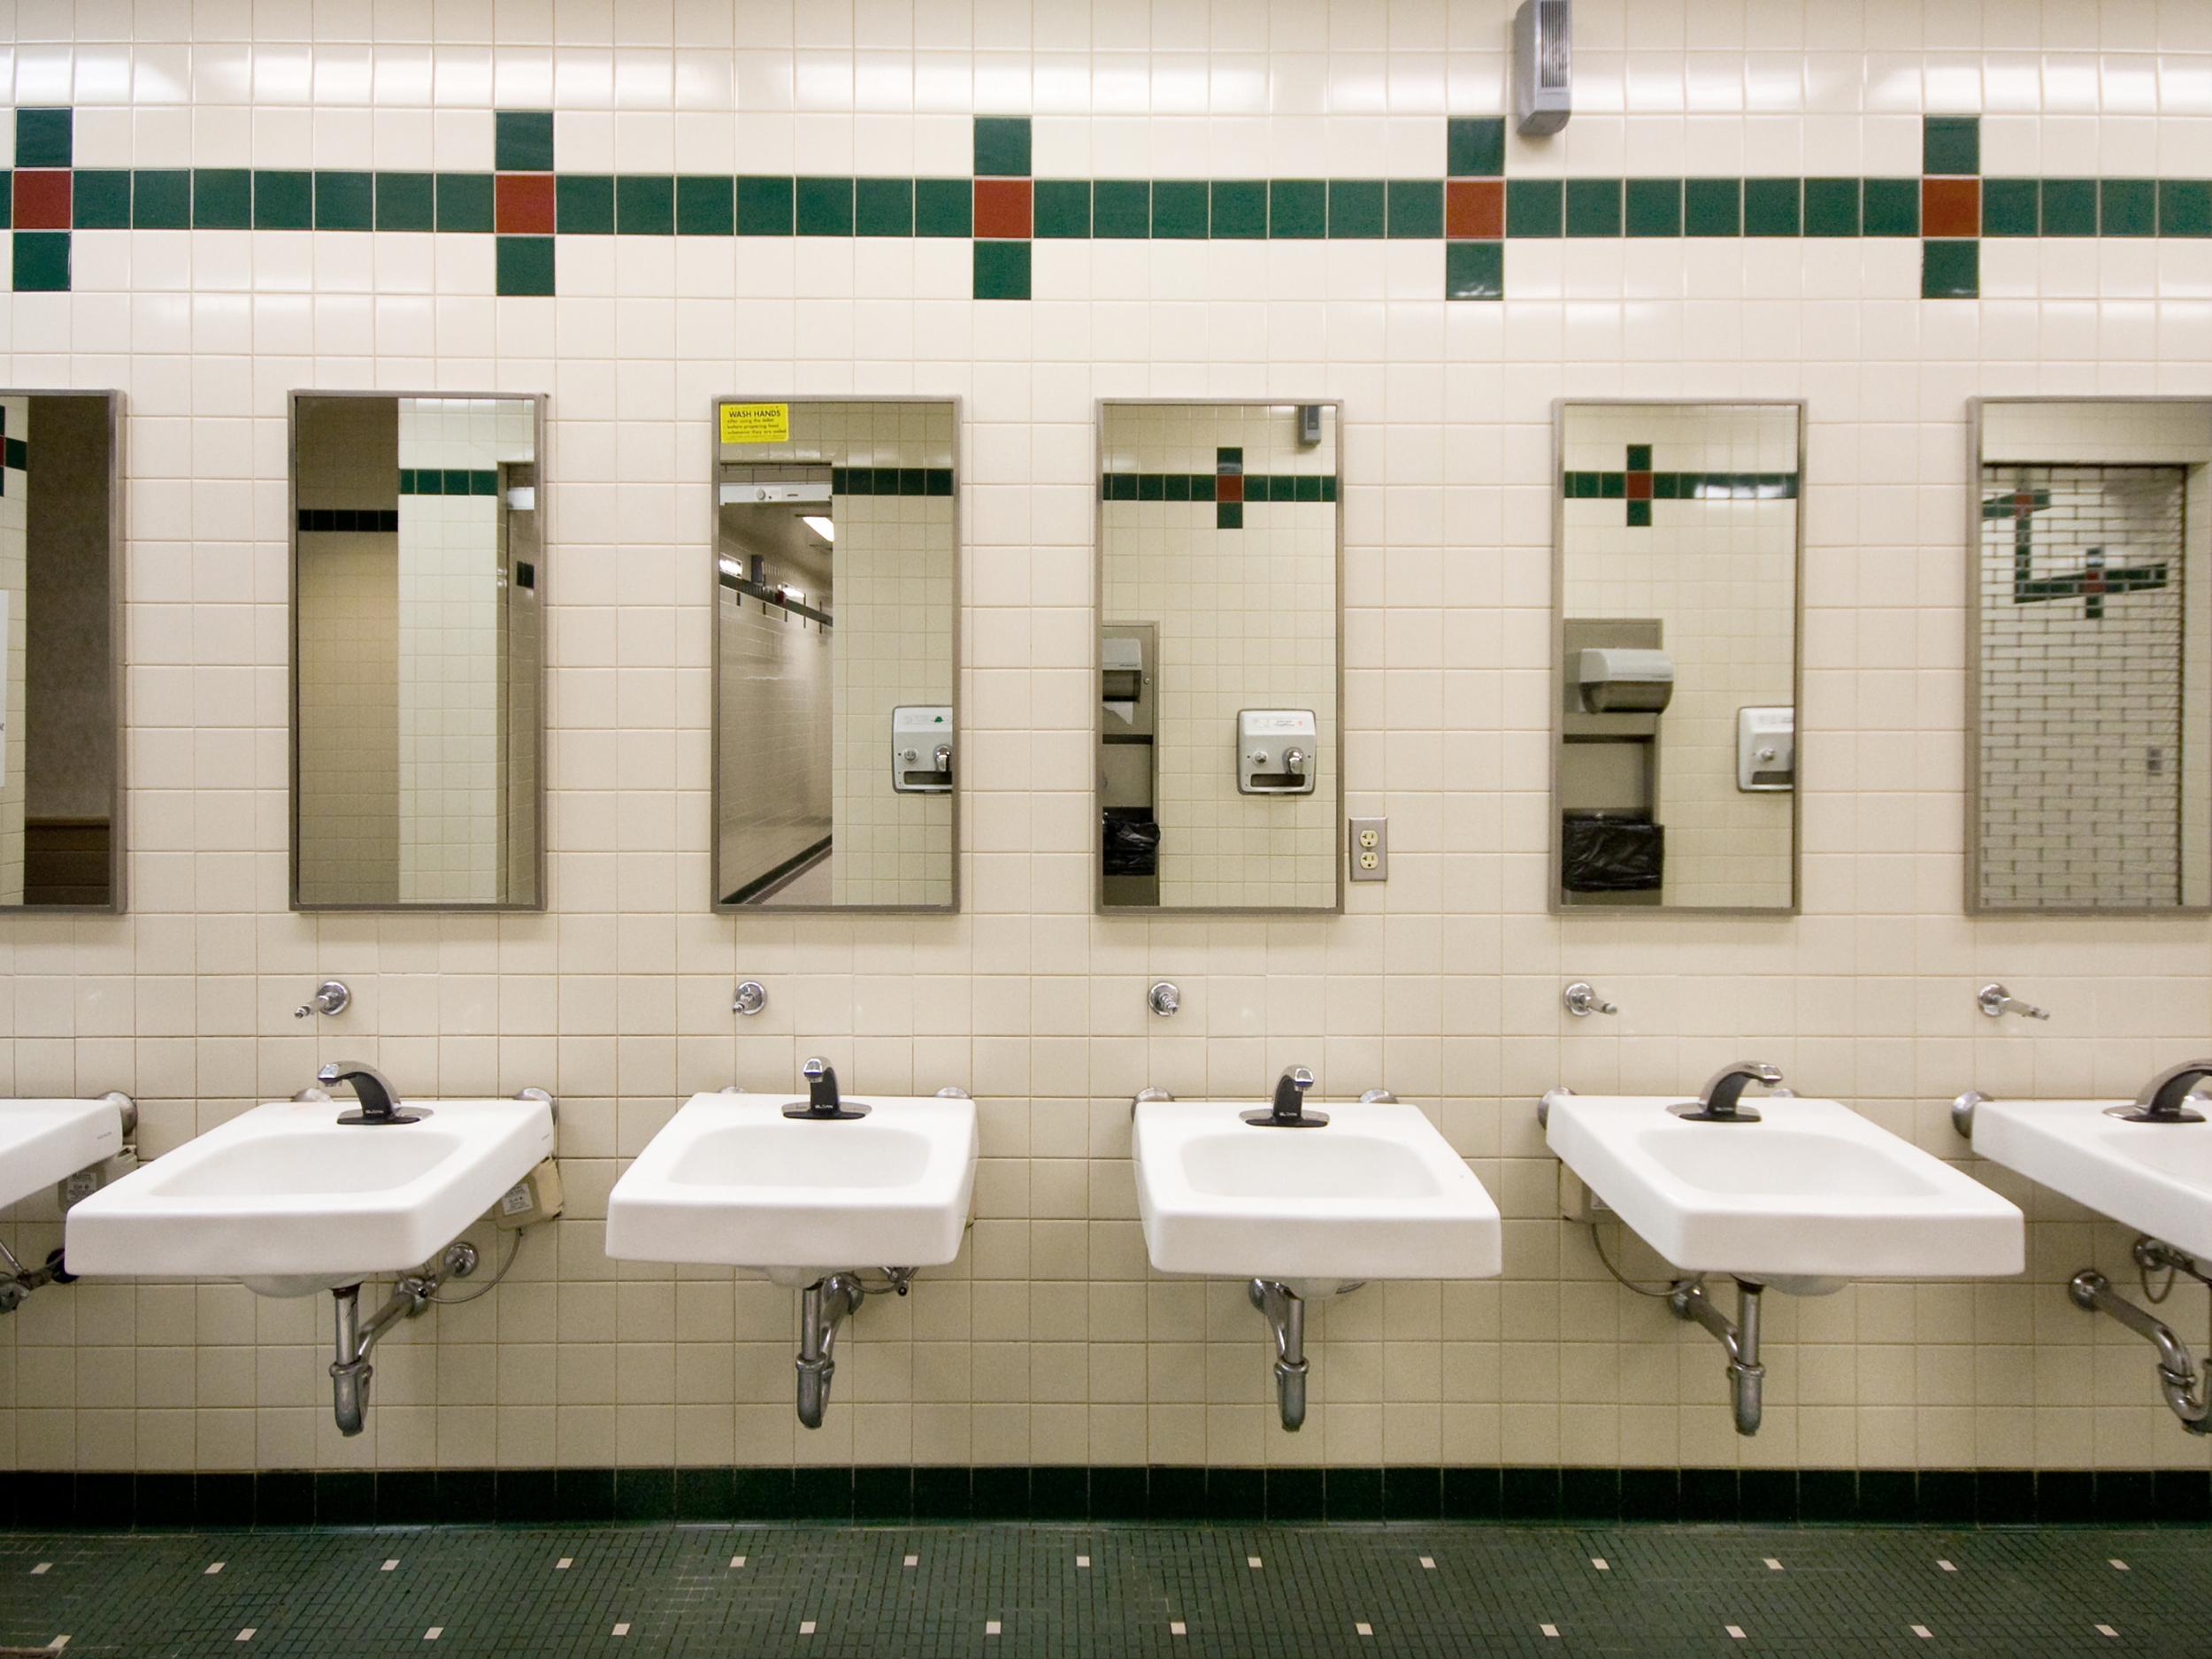 Although we all visit the loo daily, toilets remain largely undervalued and trivialised spaces